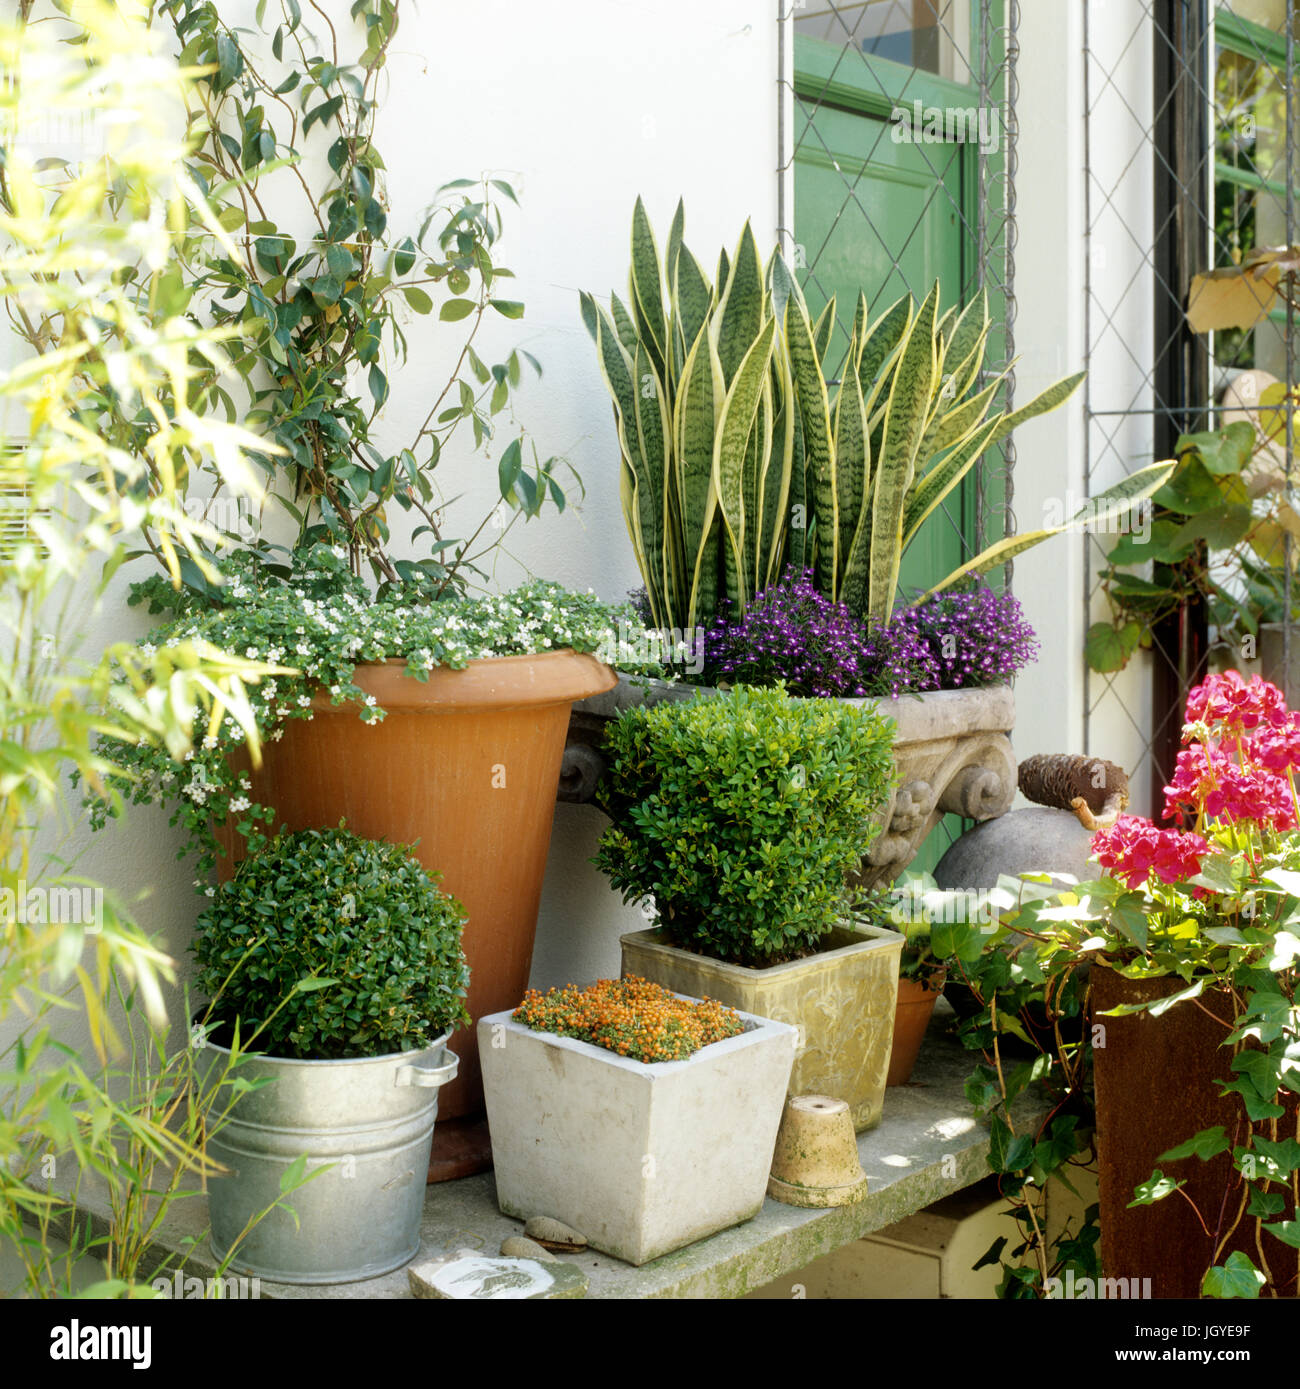 Potted plants in garden Stock Photo